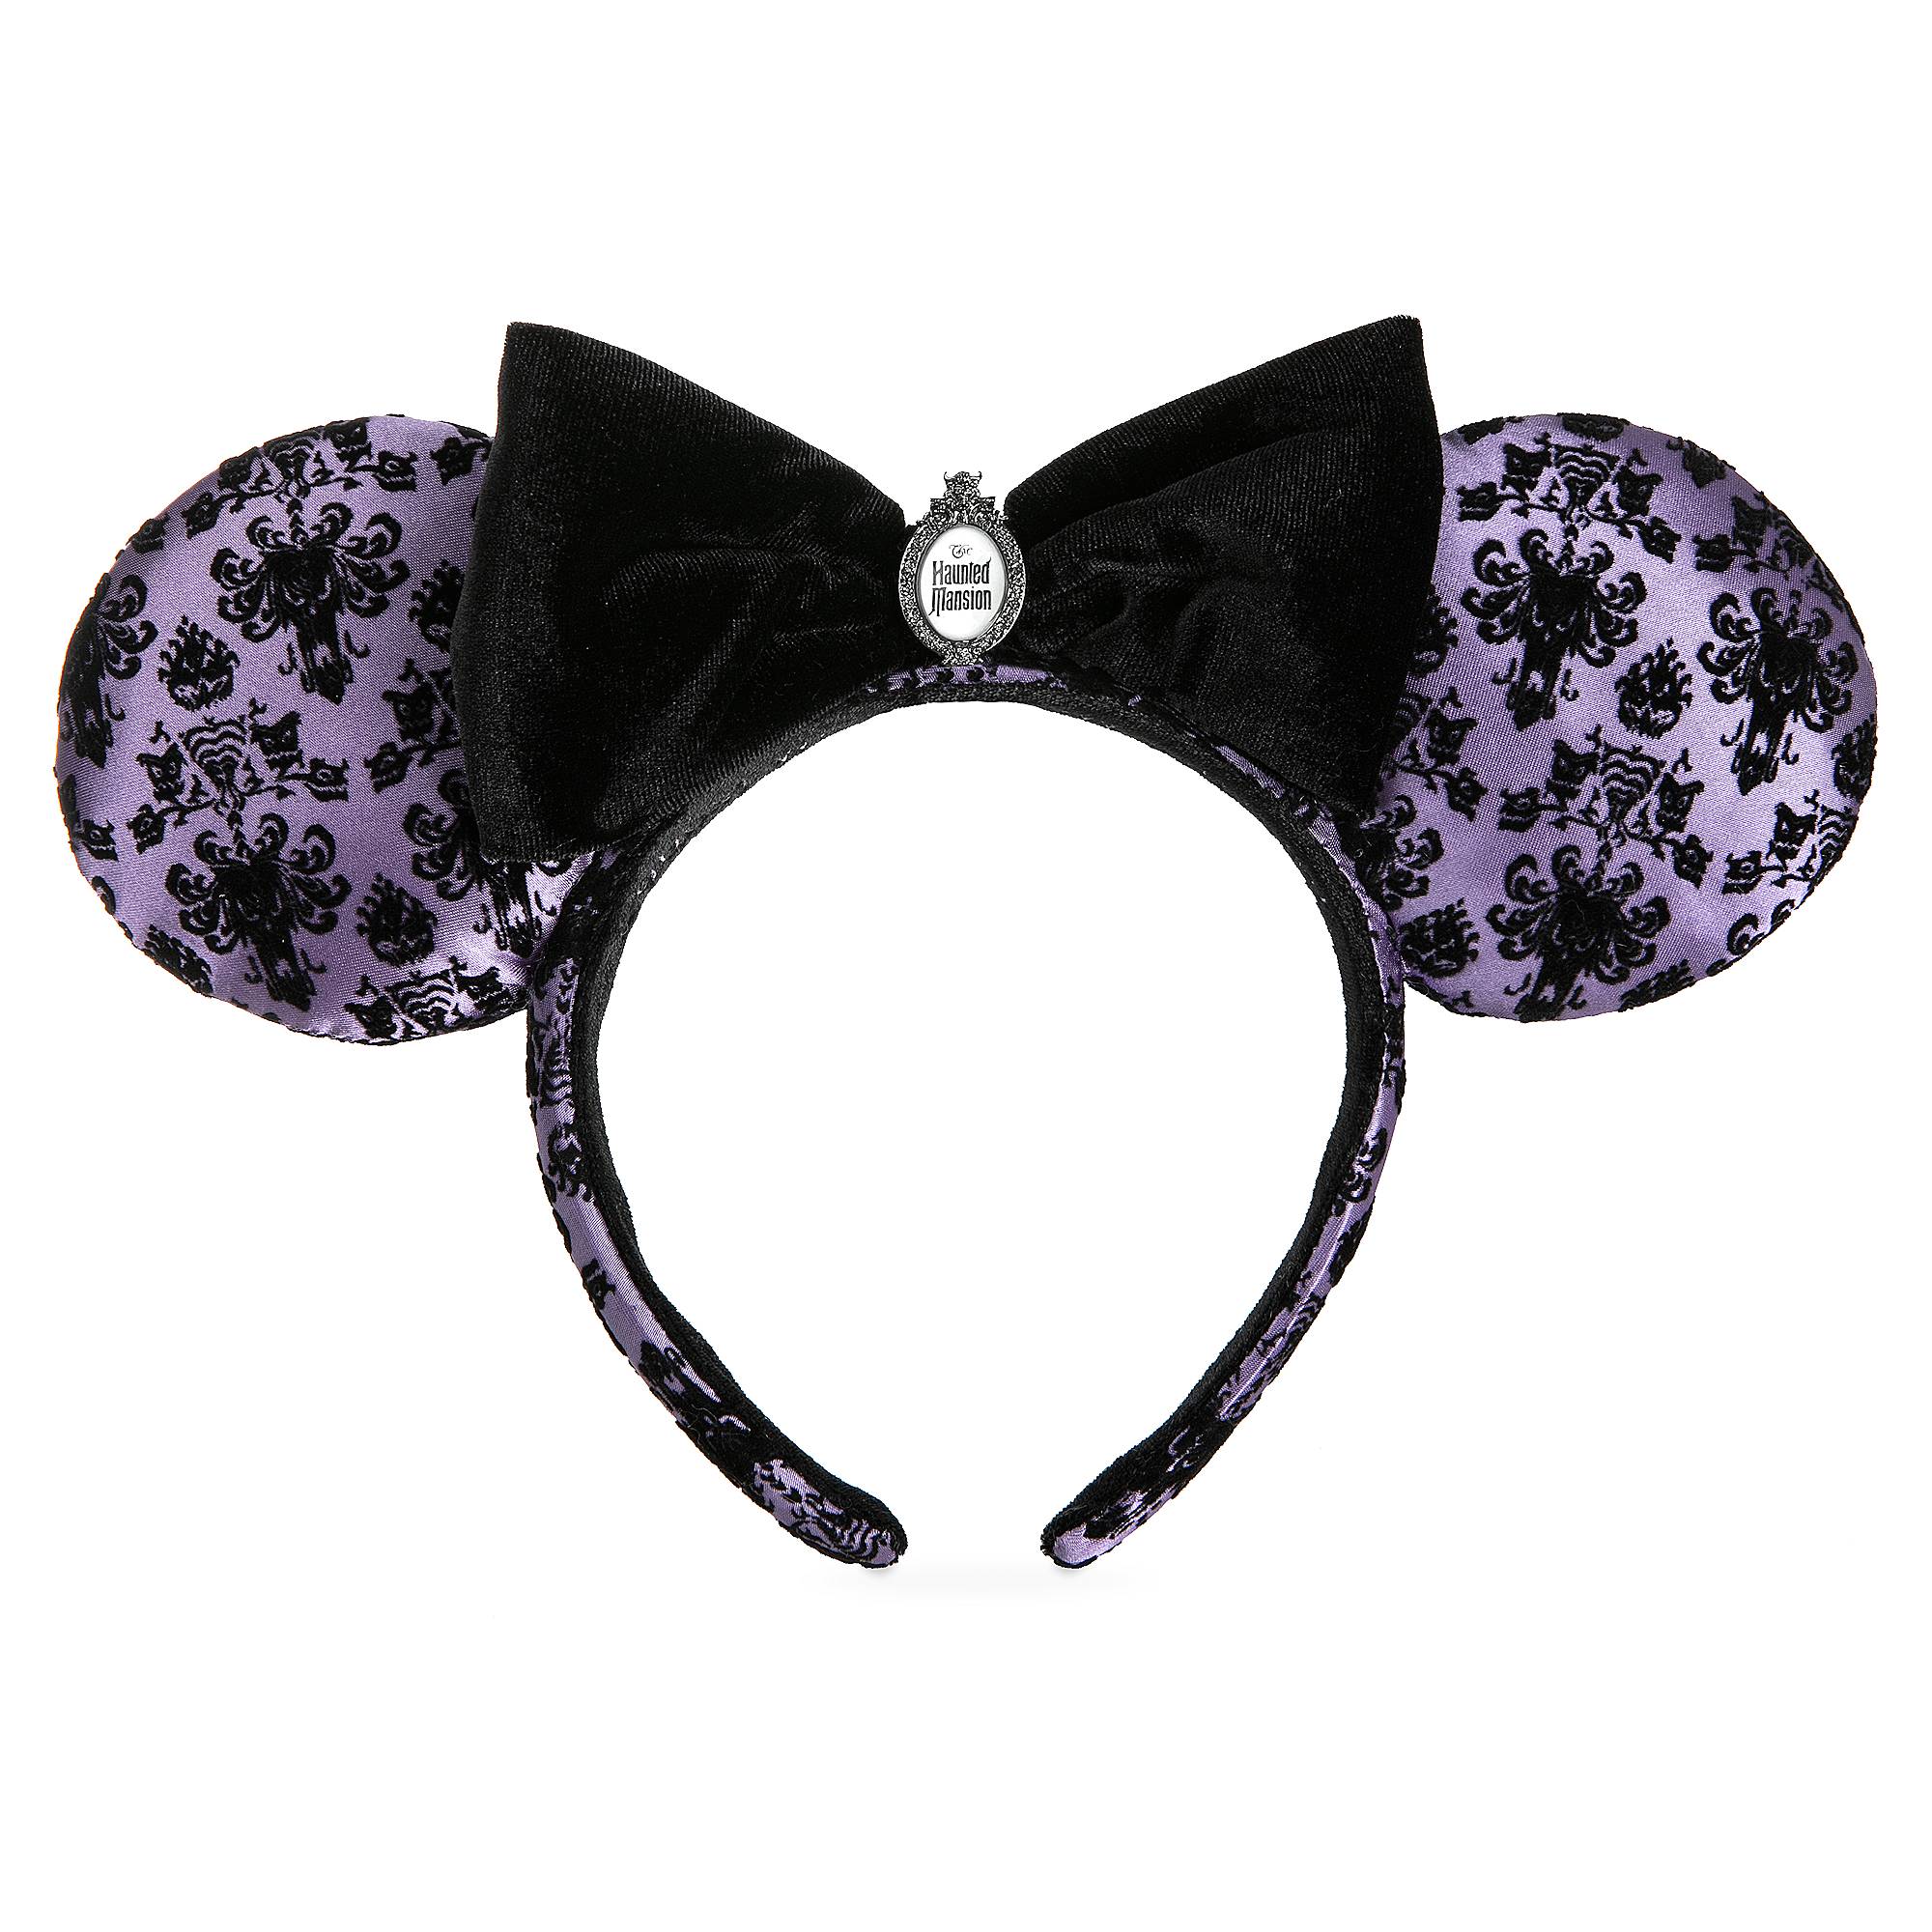 Minnie Mouse Haunted Mansion Wallpaper Ear Headband image